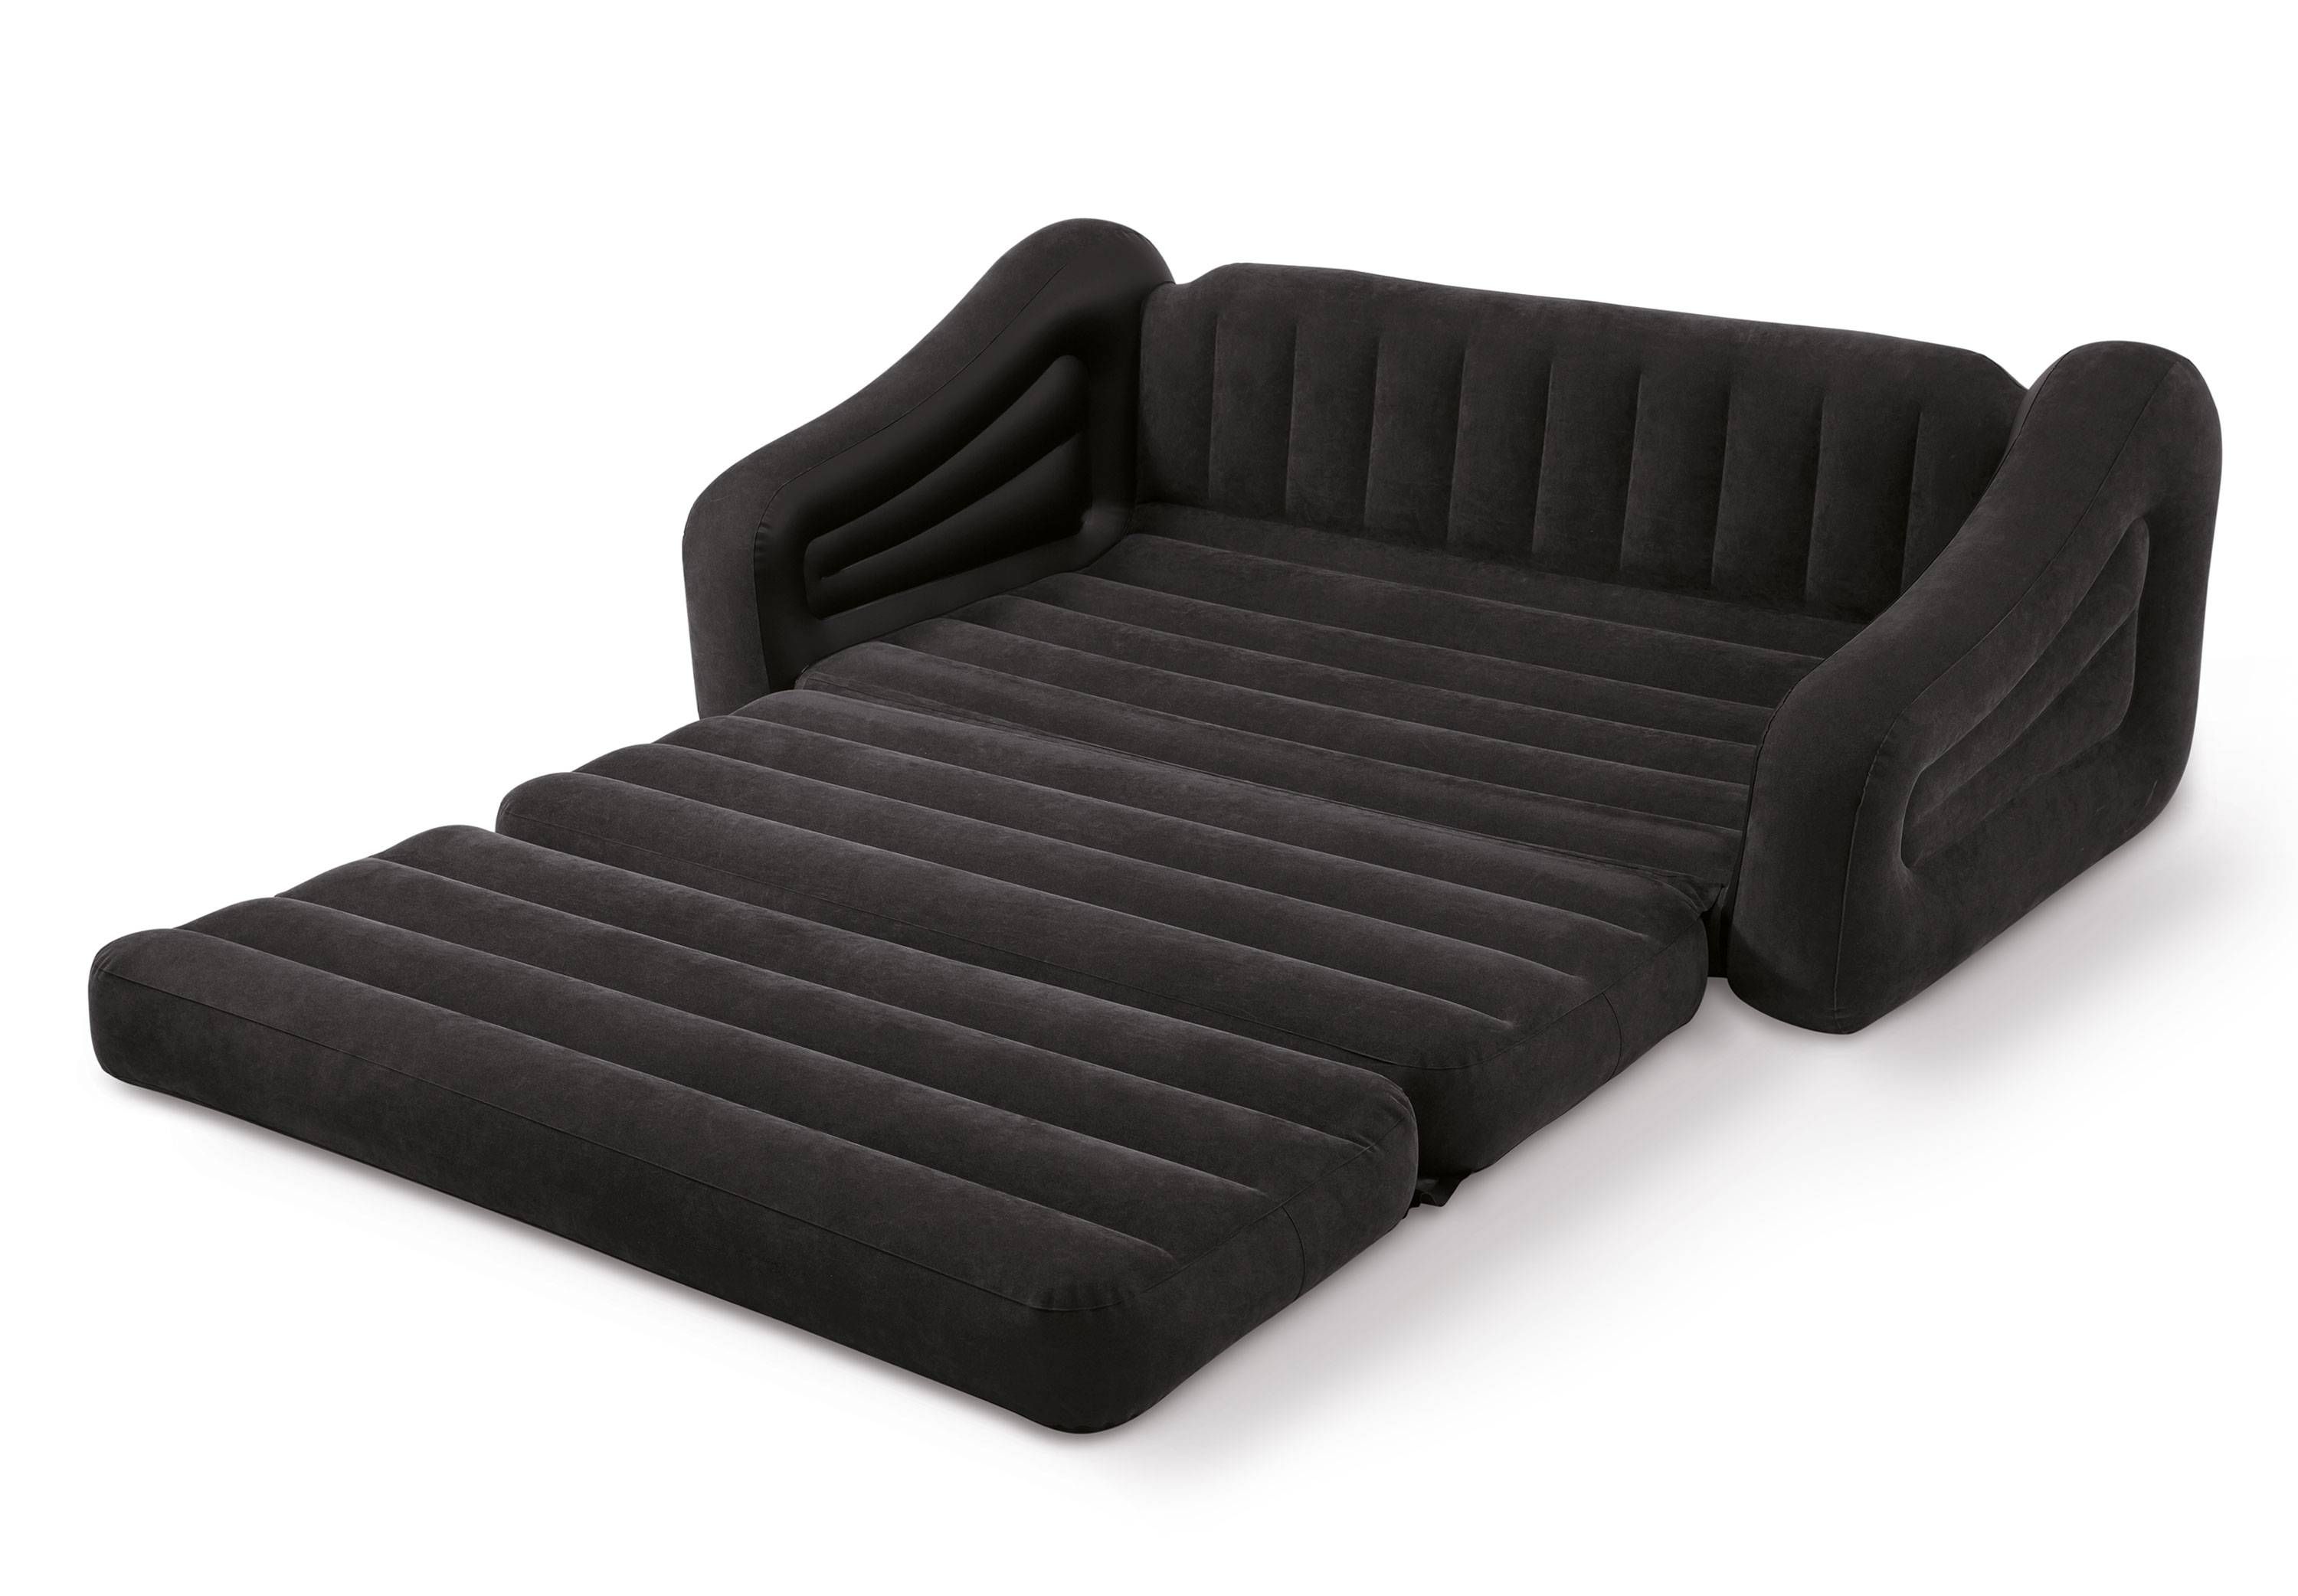 Intex Inflatable Pull Out Sofa Queen Bed Sleeper 68566ep + 66619e Pertaining To Inflatable Pull Out Sofas (View 8 of 15)